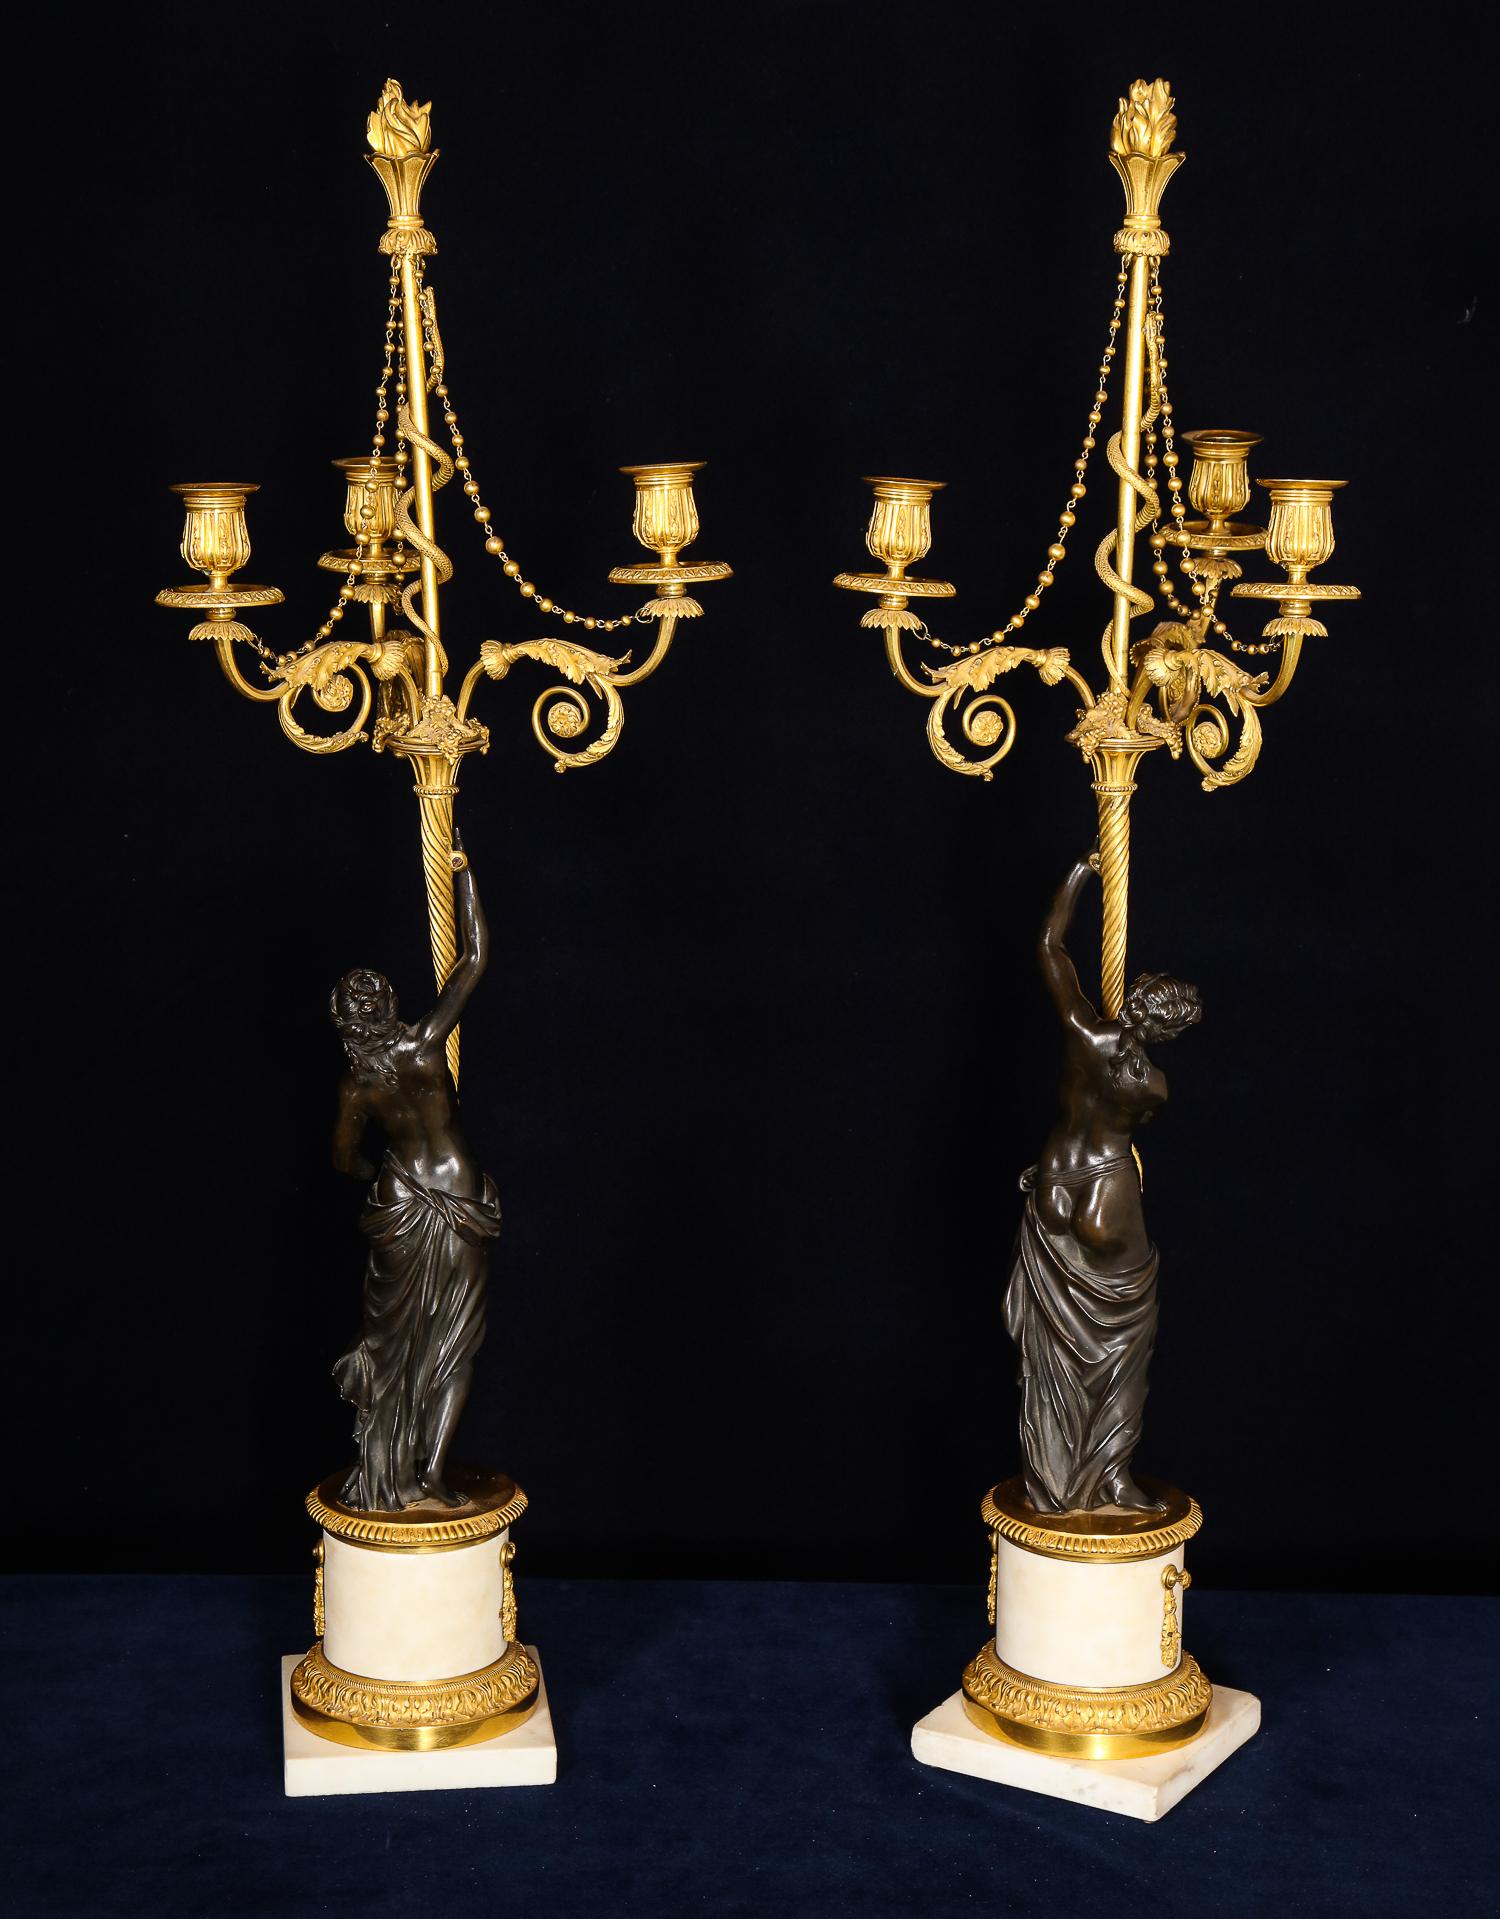 Carved Pair of Large Antique French Louis XVI Figural Gilt Bronze & Marble Candelabras